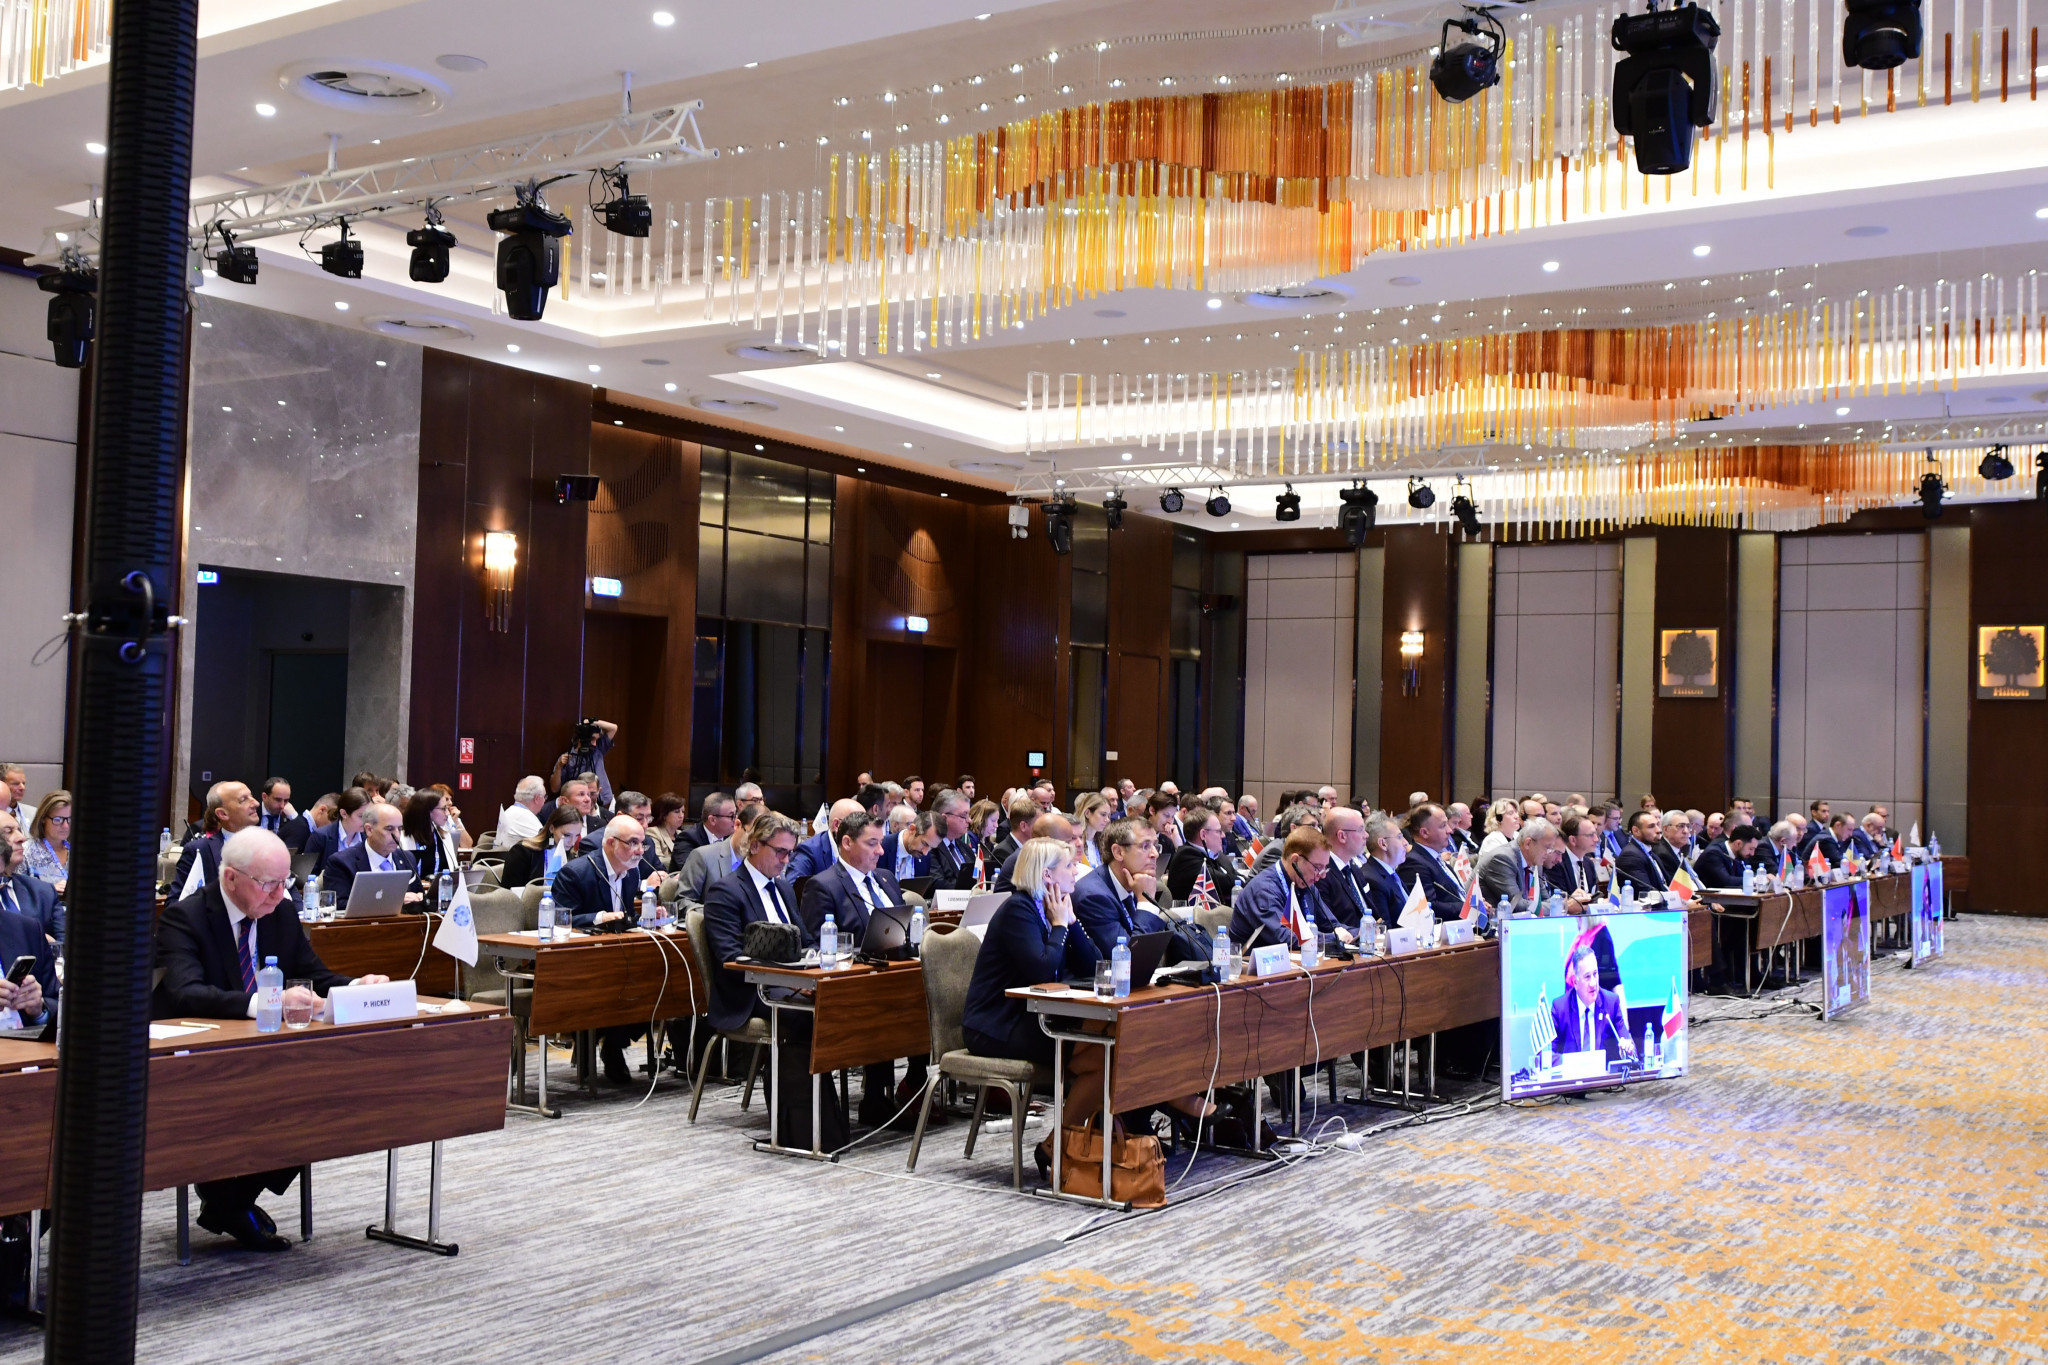 The General Assembly was held at the DoubleTree by Hilton Skopje without the presence of National Olympic Committees from Russia and Belarus ©EOC